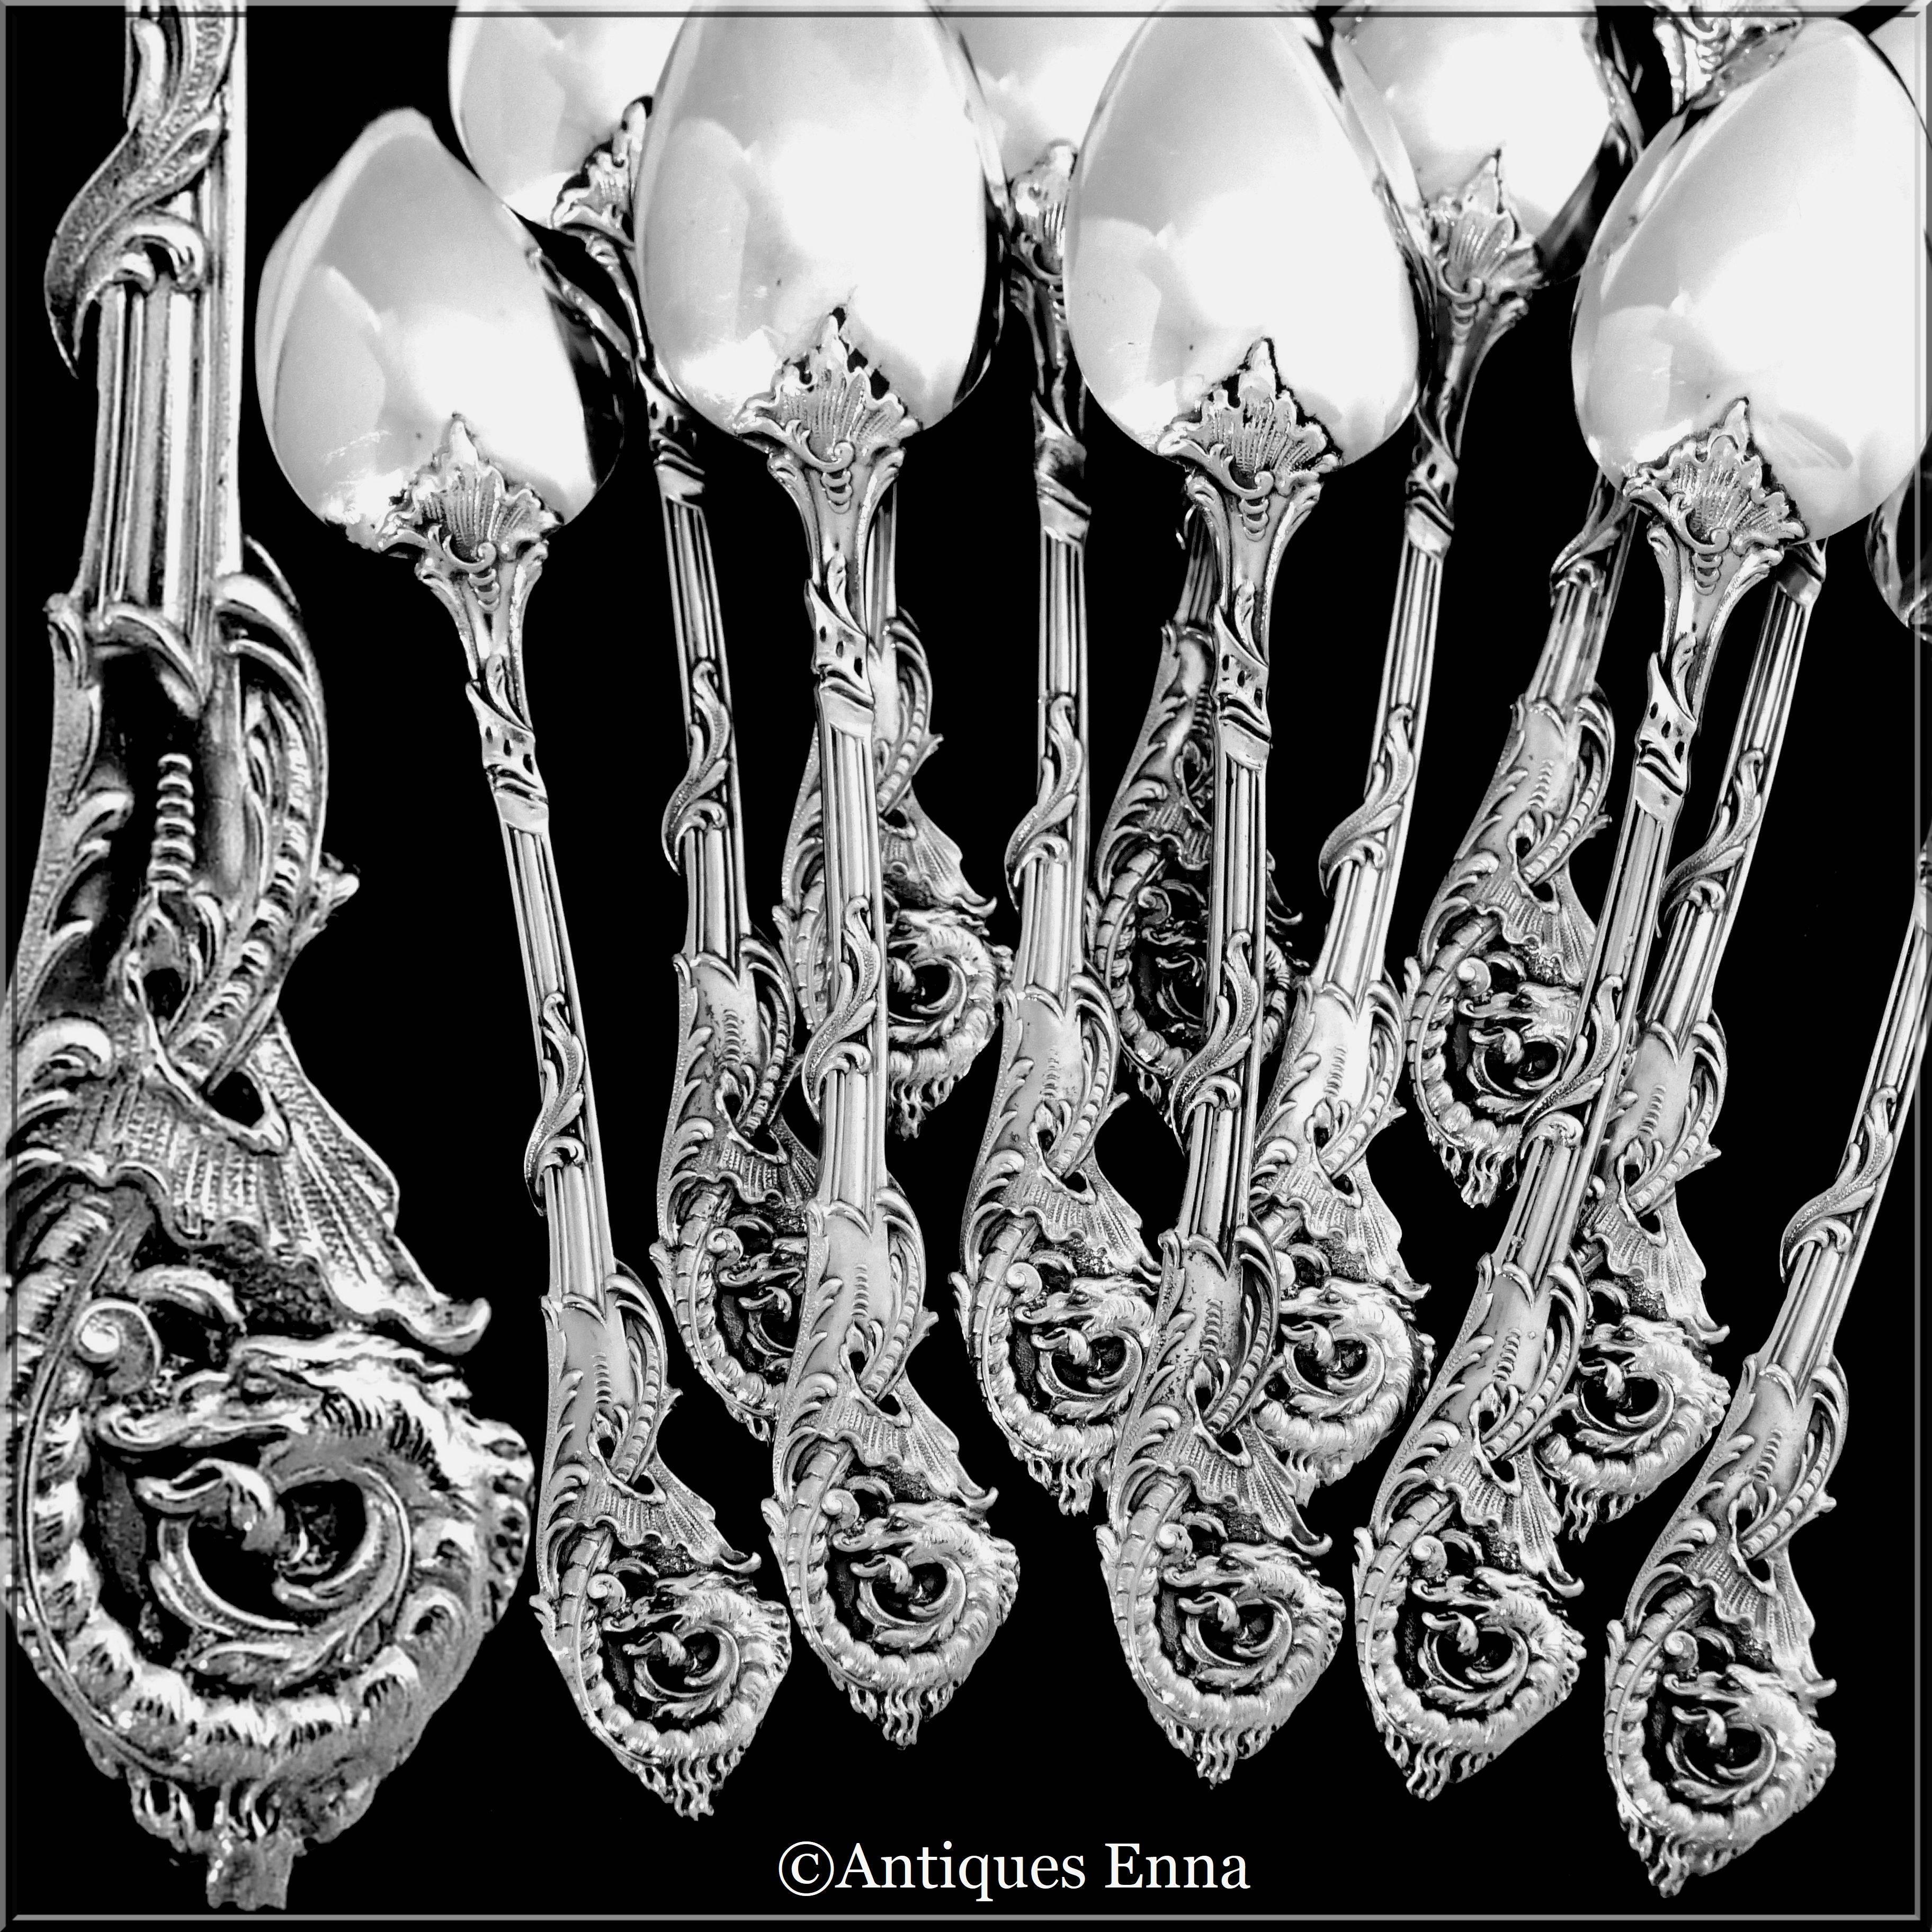 Exceptional tea/coffee spoons set of 12 pieces with embellishments and bowls where the inside is covered with gold 18-karat. The pieced handles have Japonisme style with sculpted dragons.

Pieces with Japonisme decoration are not common and these